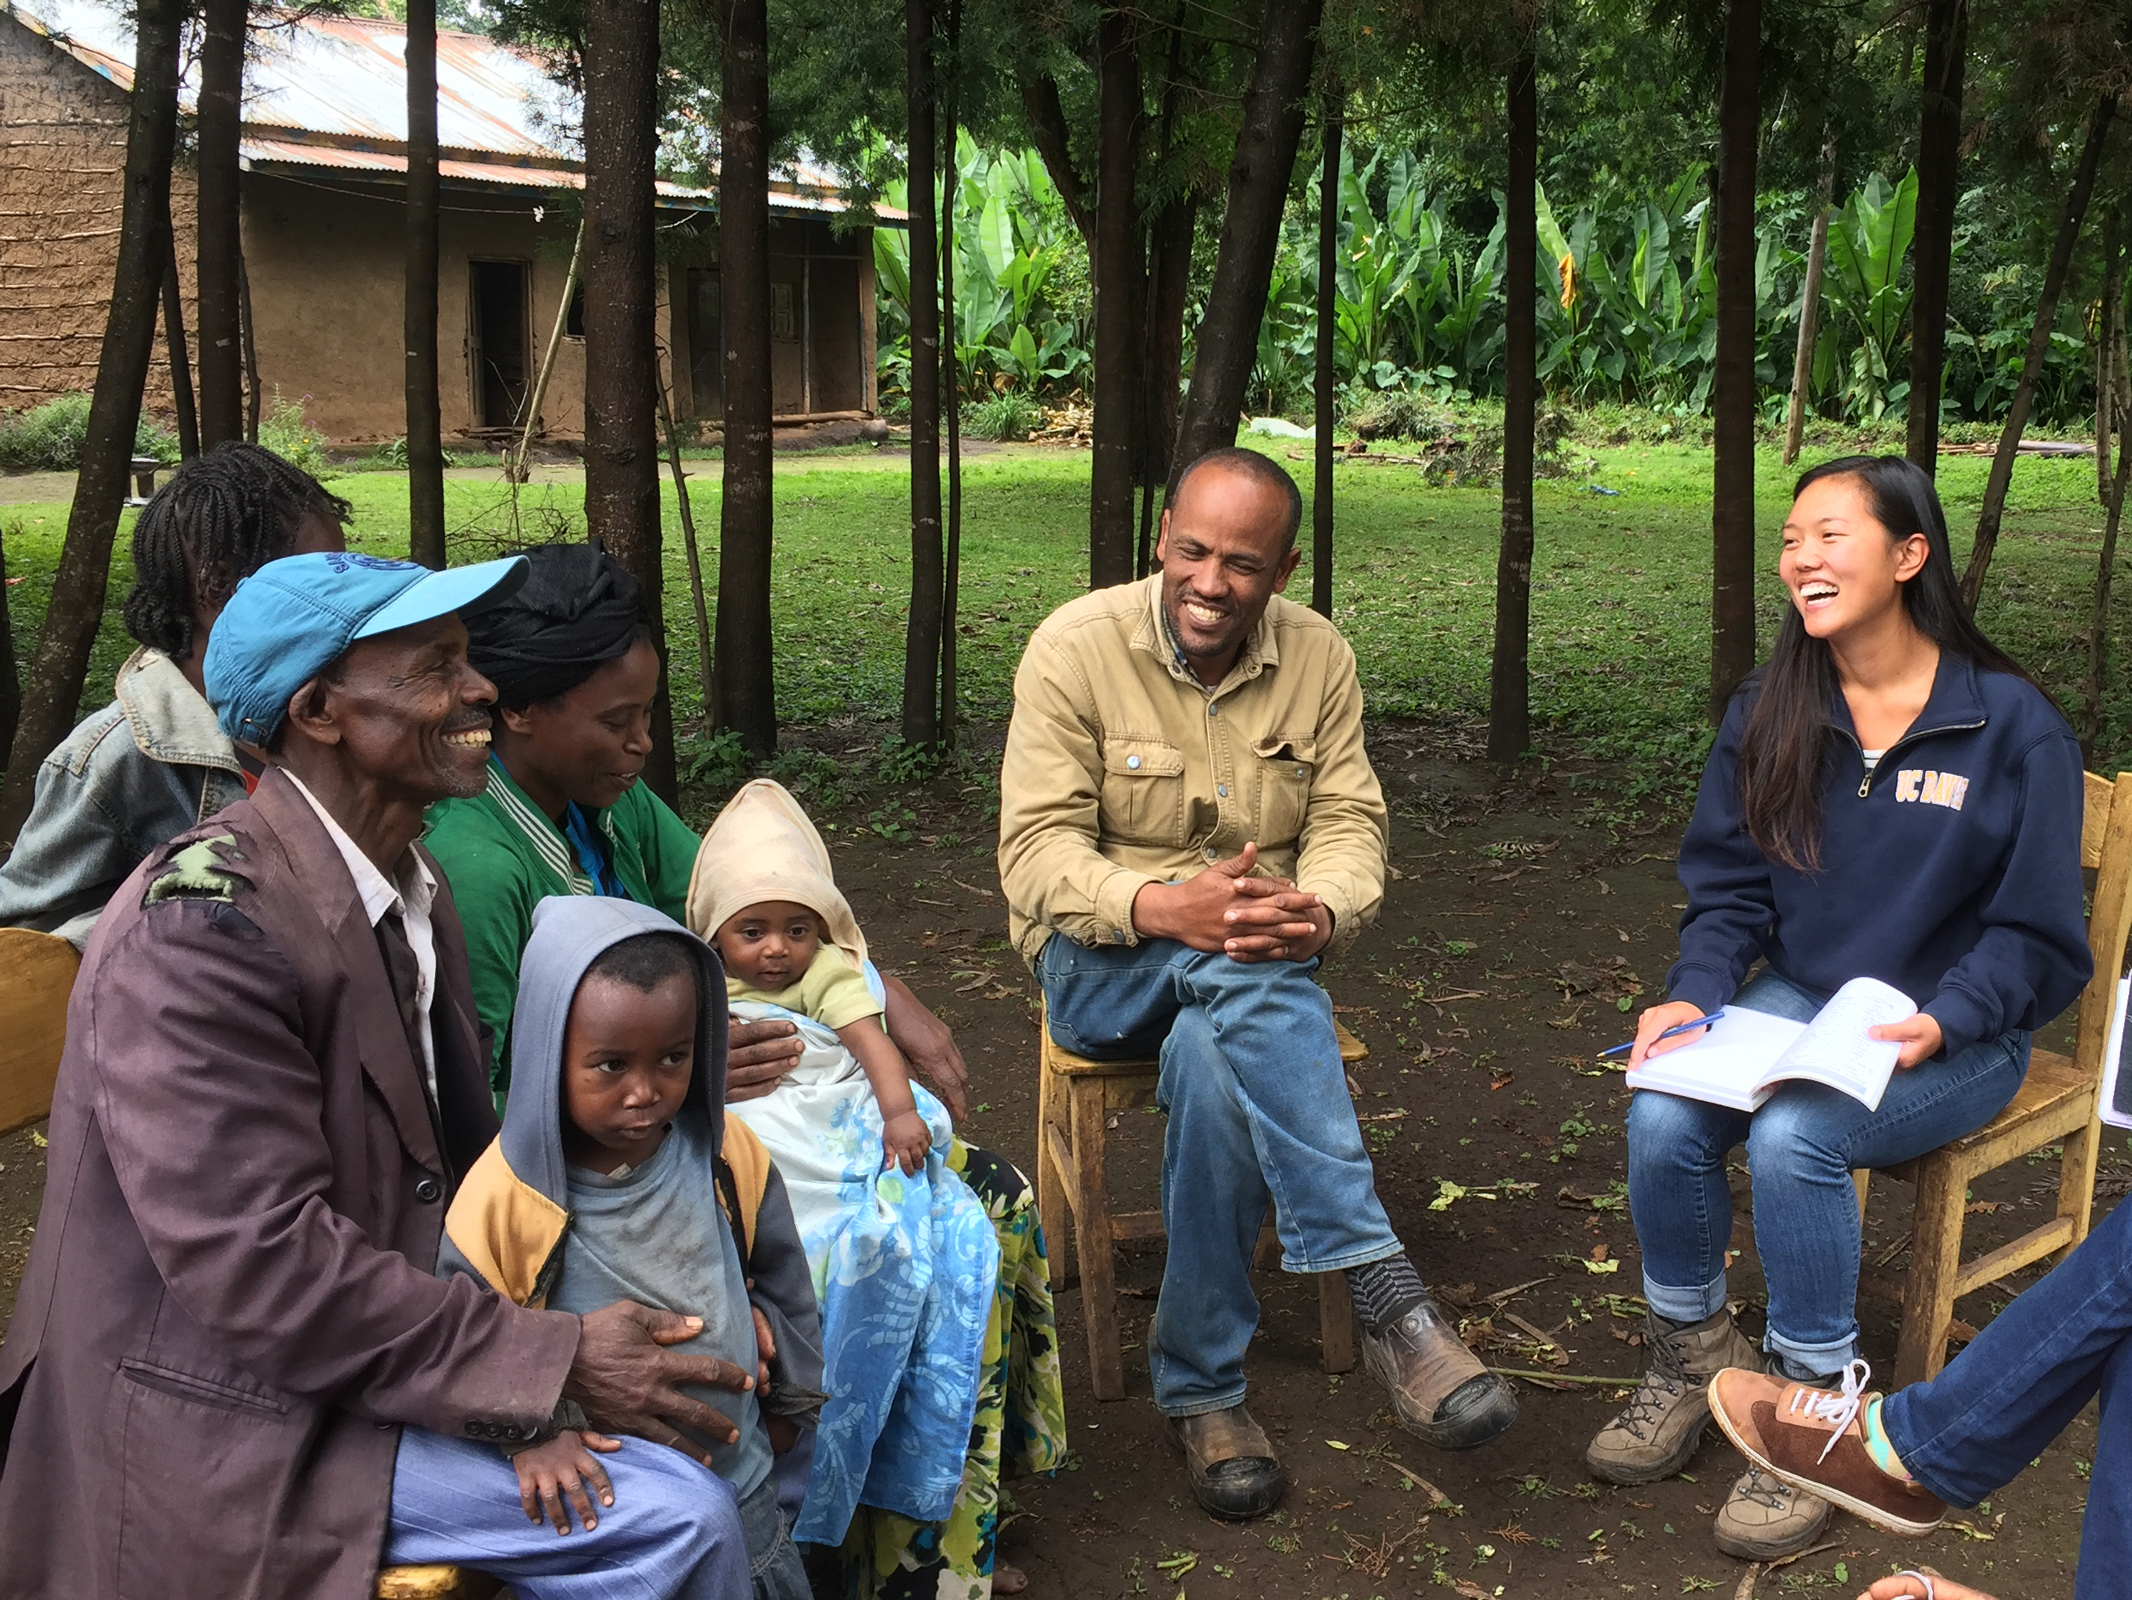 Seated outside in Ethiopia, group of farmers discusses sweet potato crop with local researchers and a UC Davis student